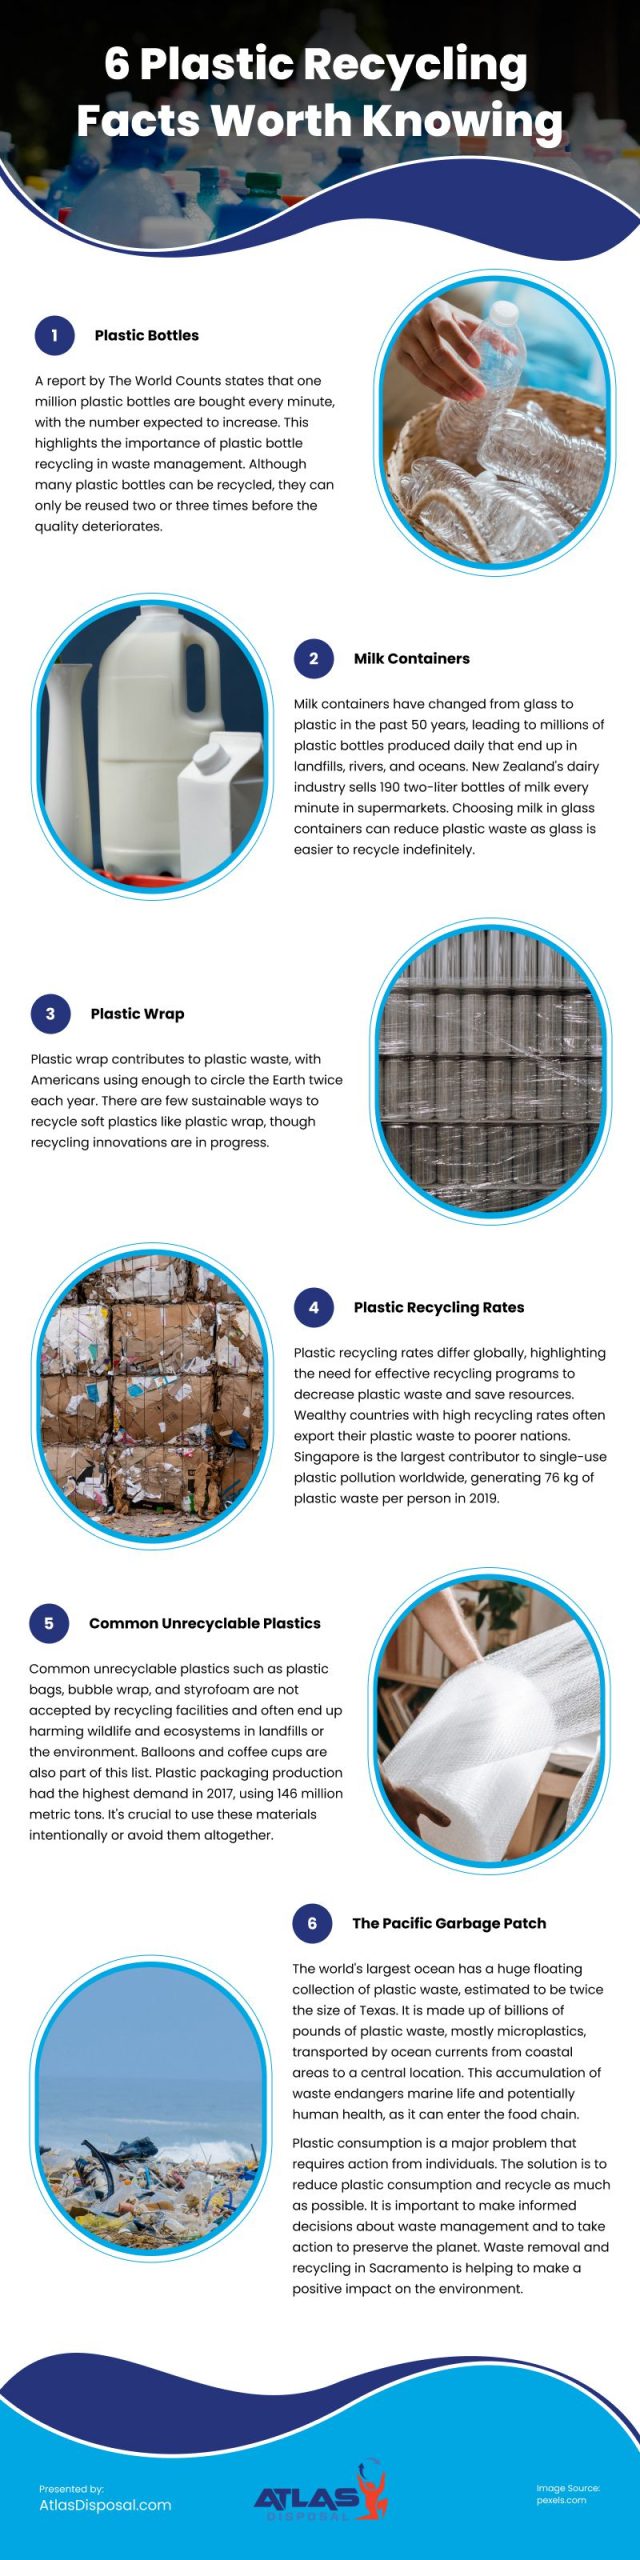 6 Plastic Recycling Facts Worth Knowing Infographic